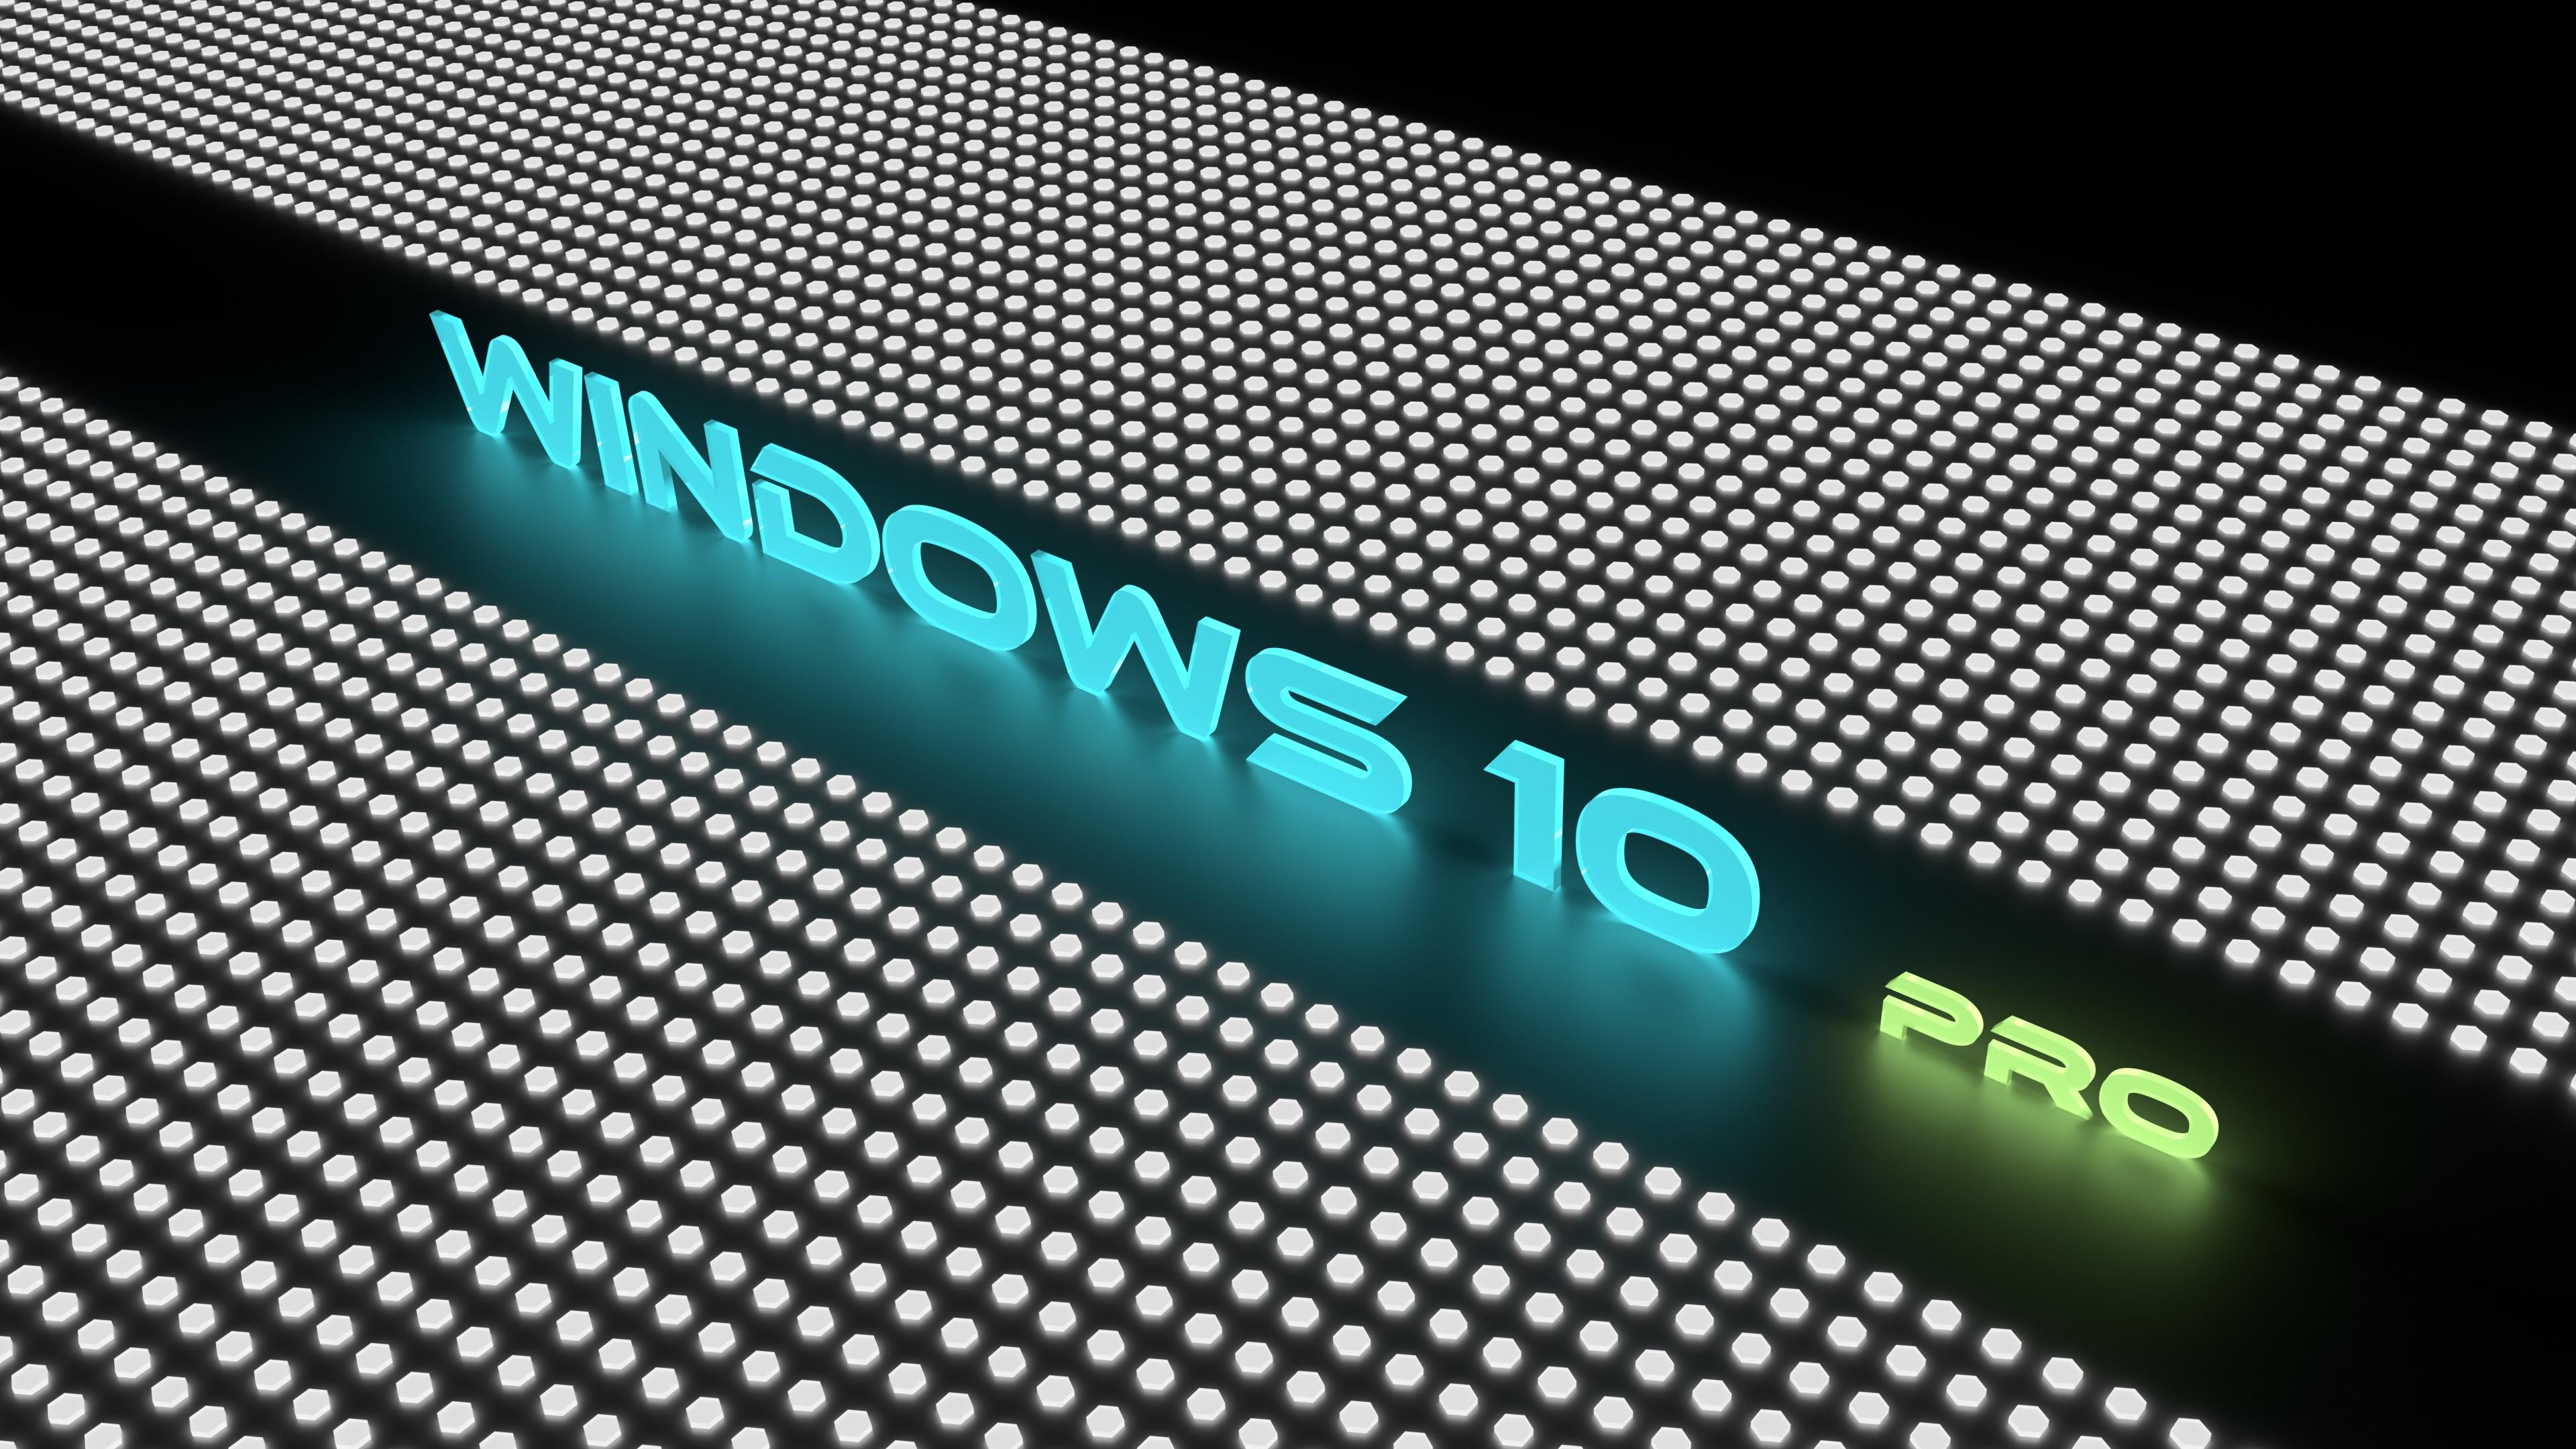 Wallpapers Windows 10 Pro, Neon colors, 4K, Technology,